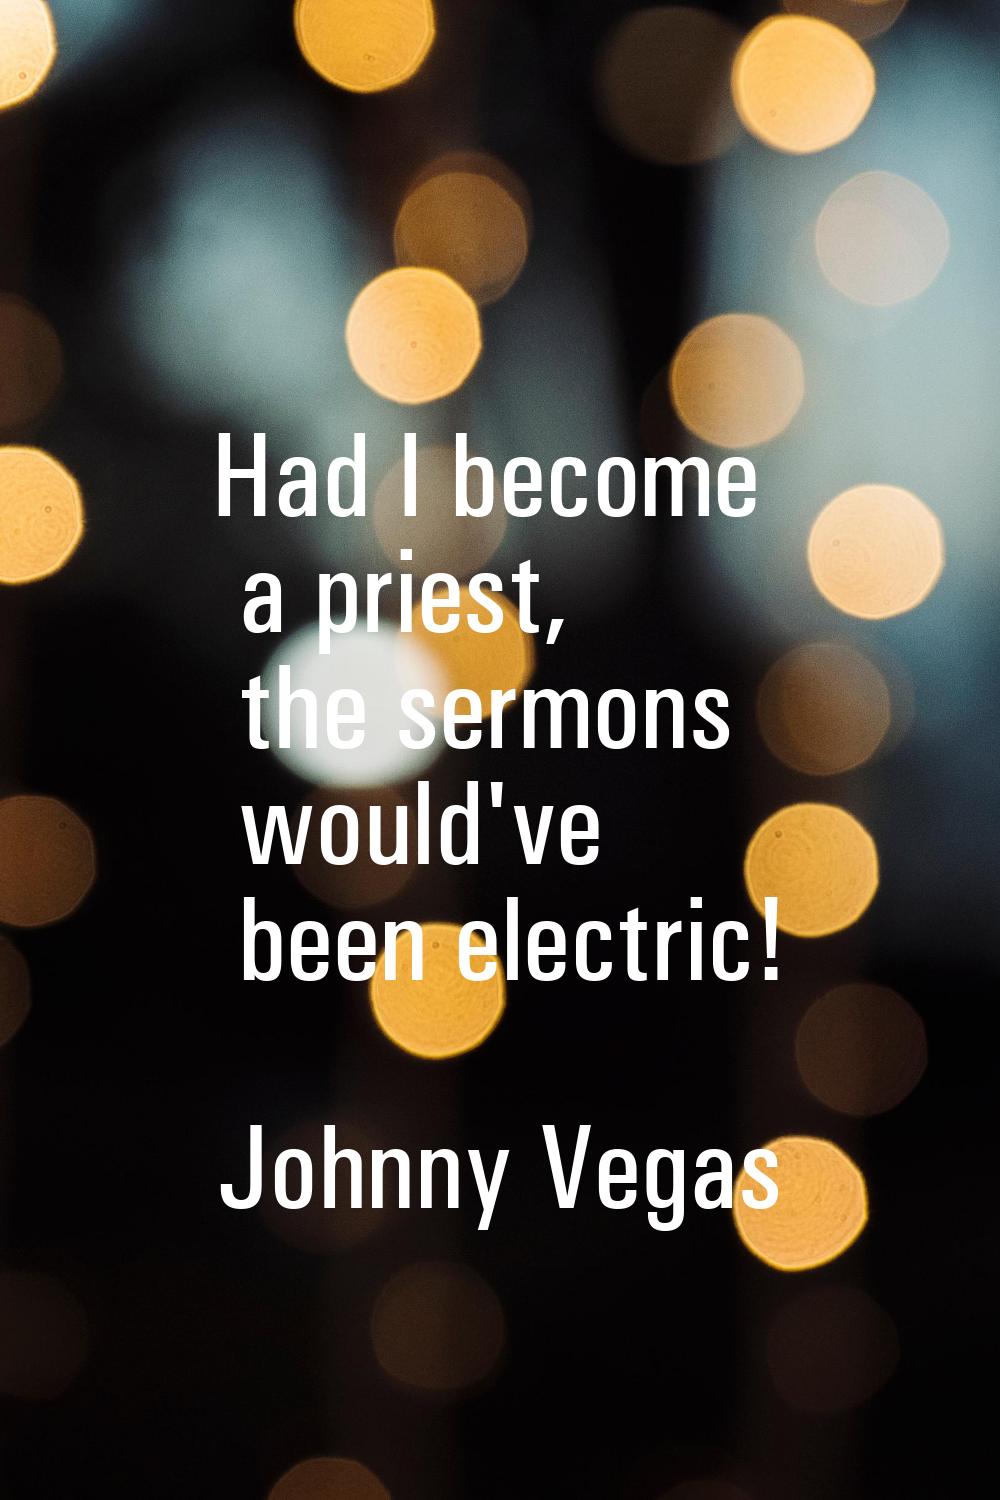 Had I become a priest, the sermons would've been electric!